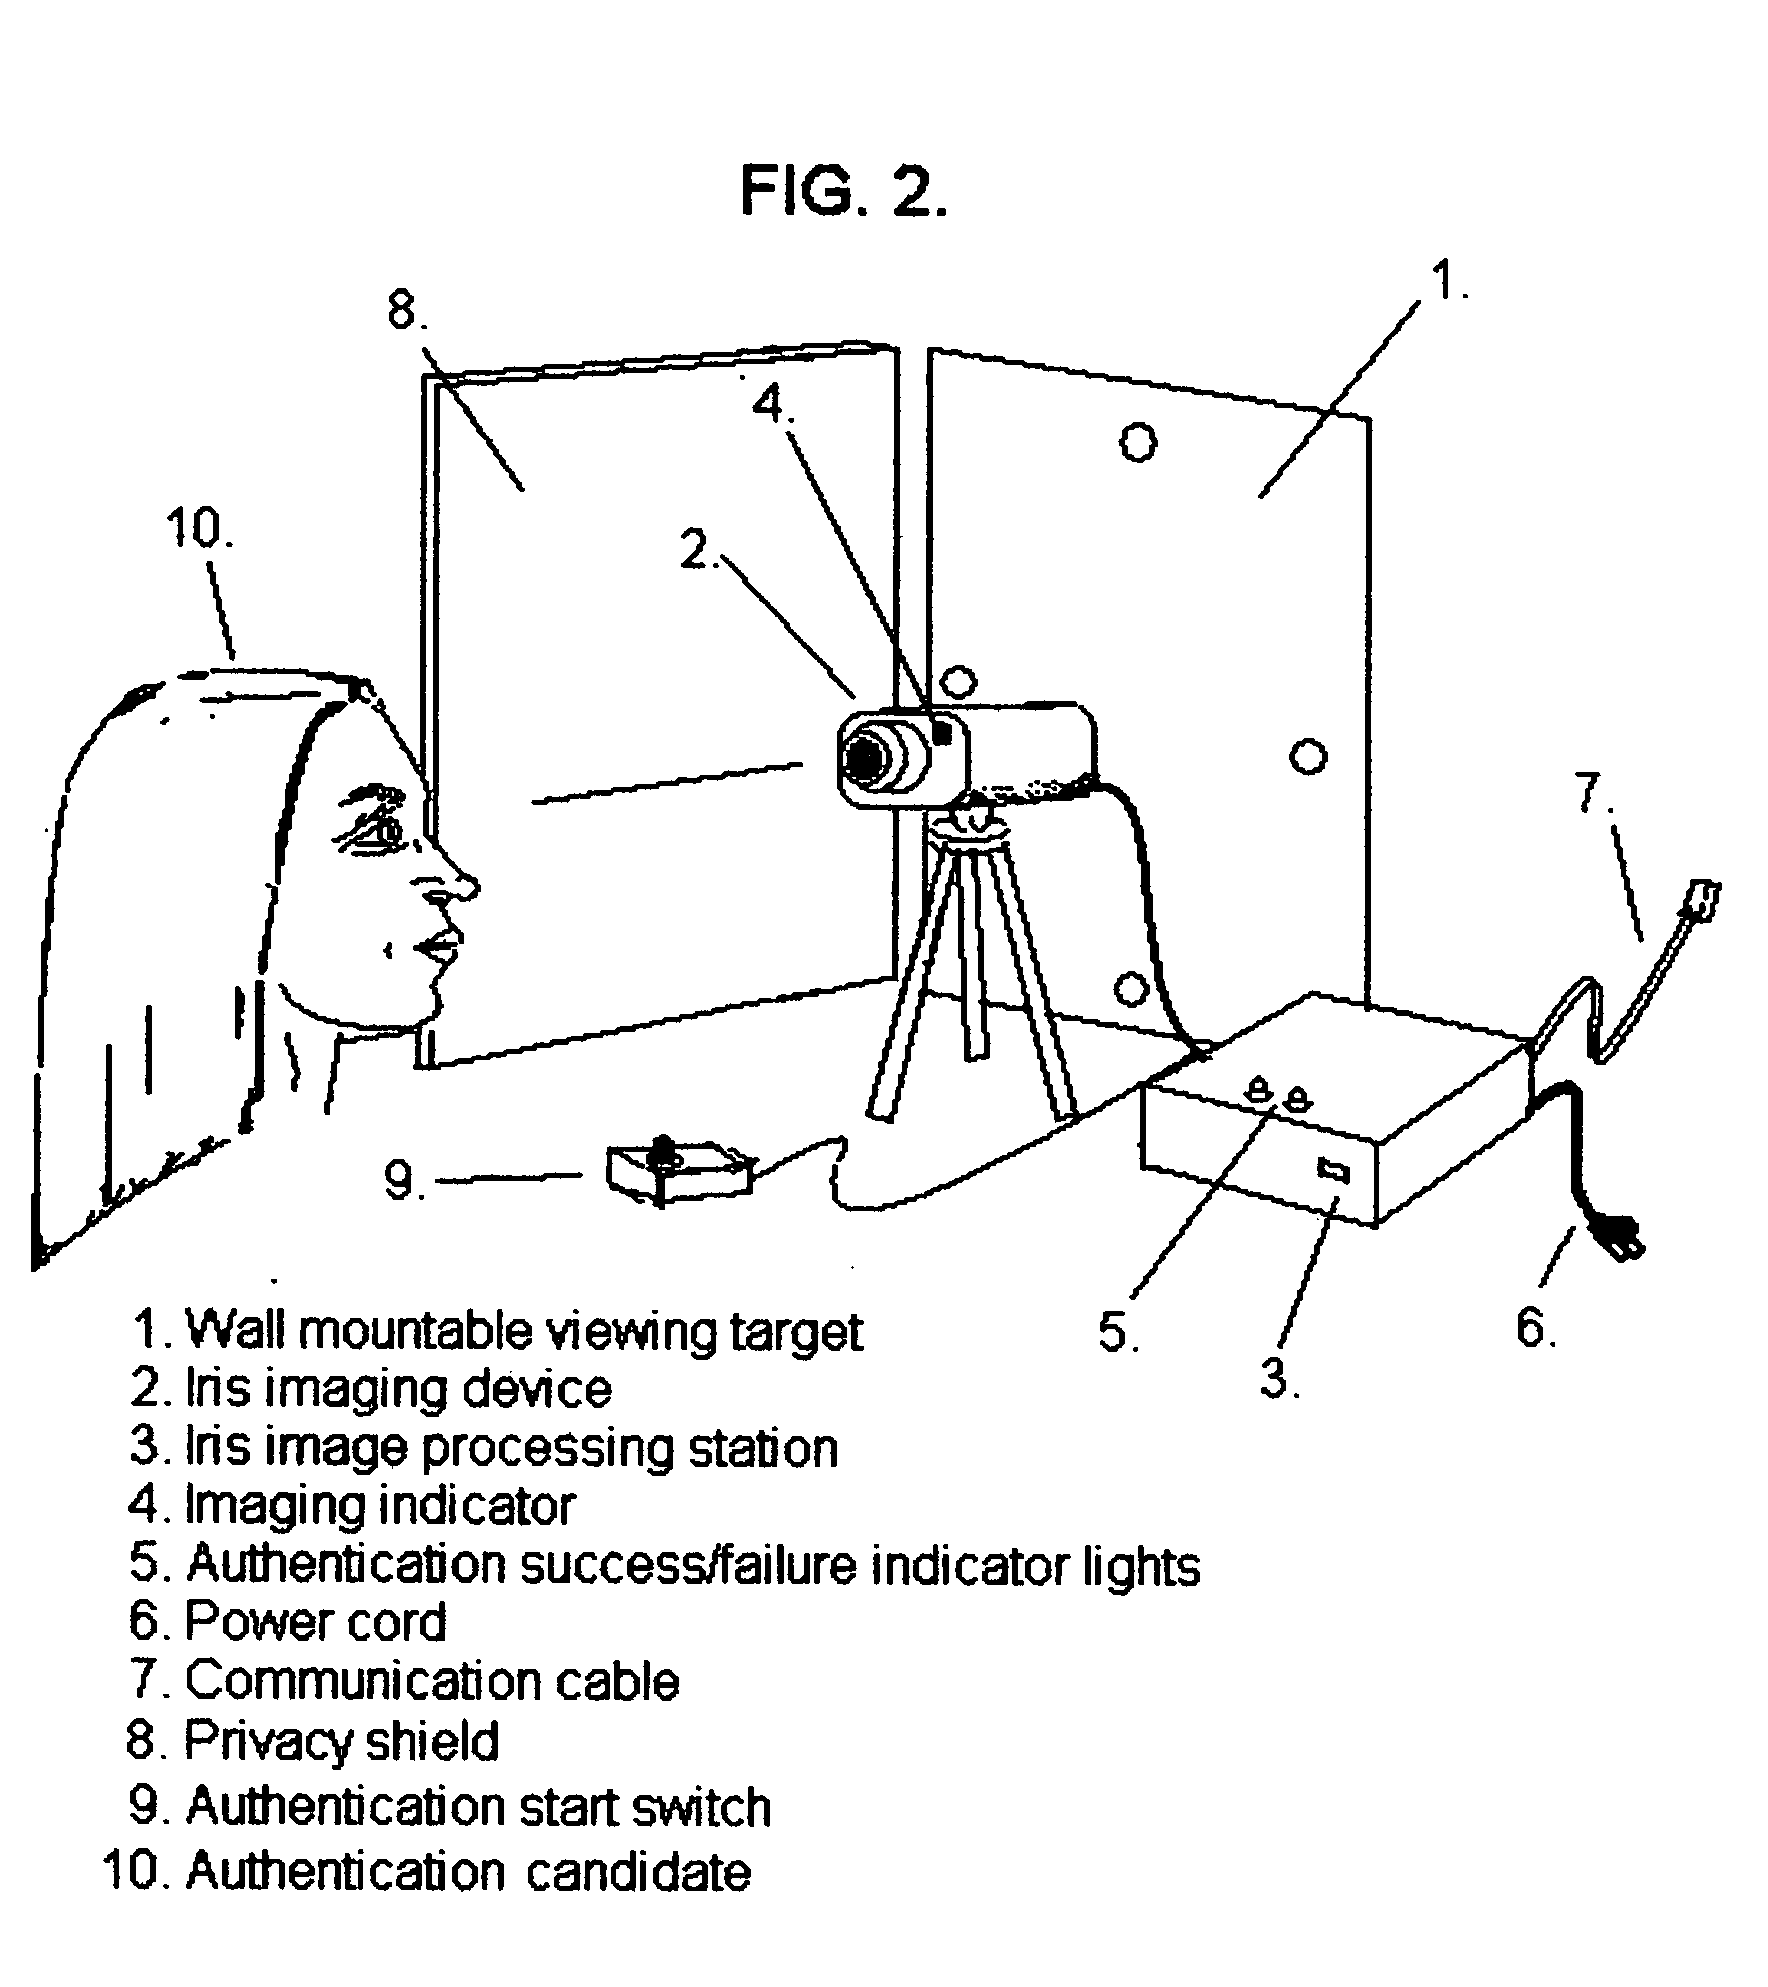 Technique using eye position and state of closure for increasing the effectiveness of iris recognition authentication systems